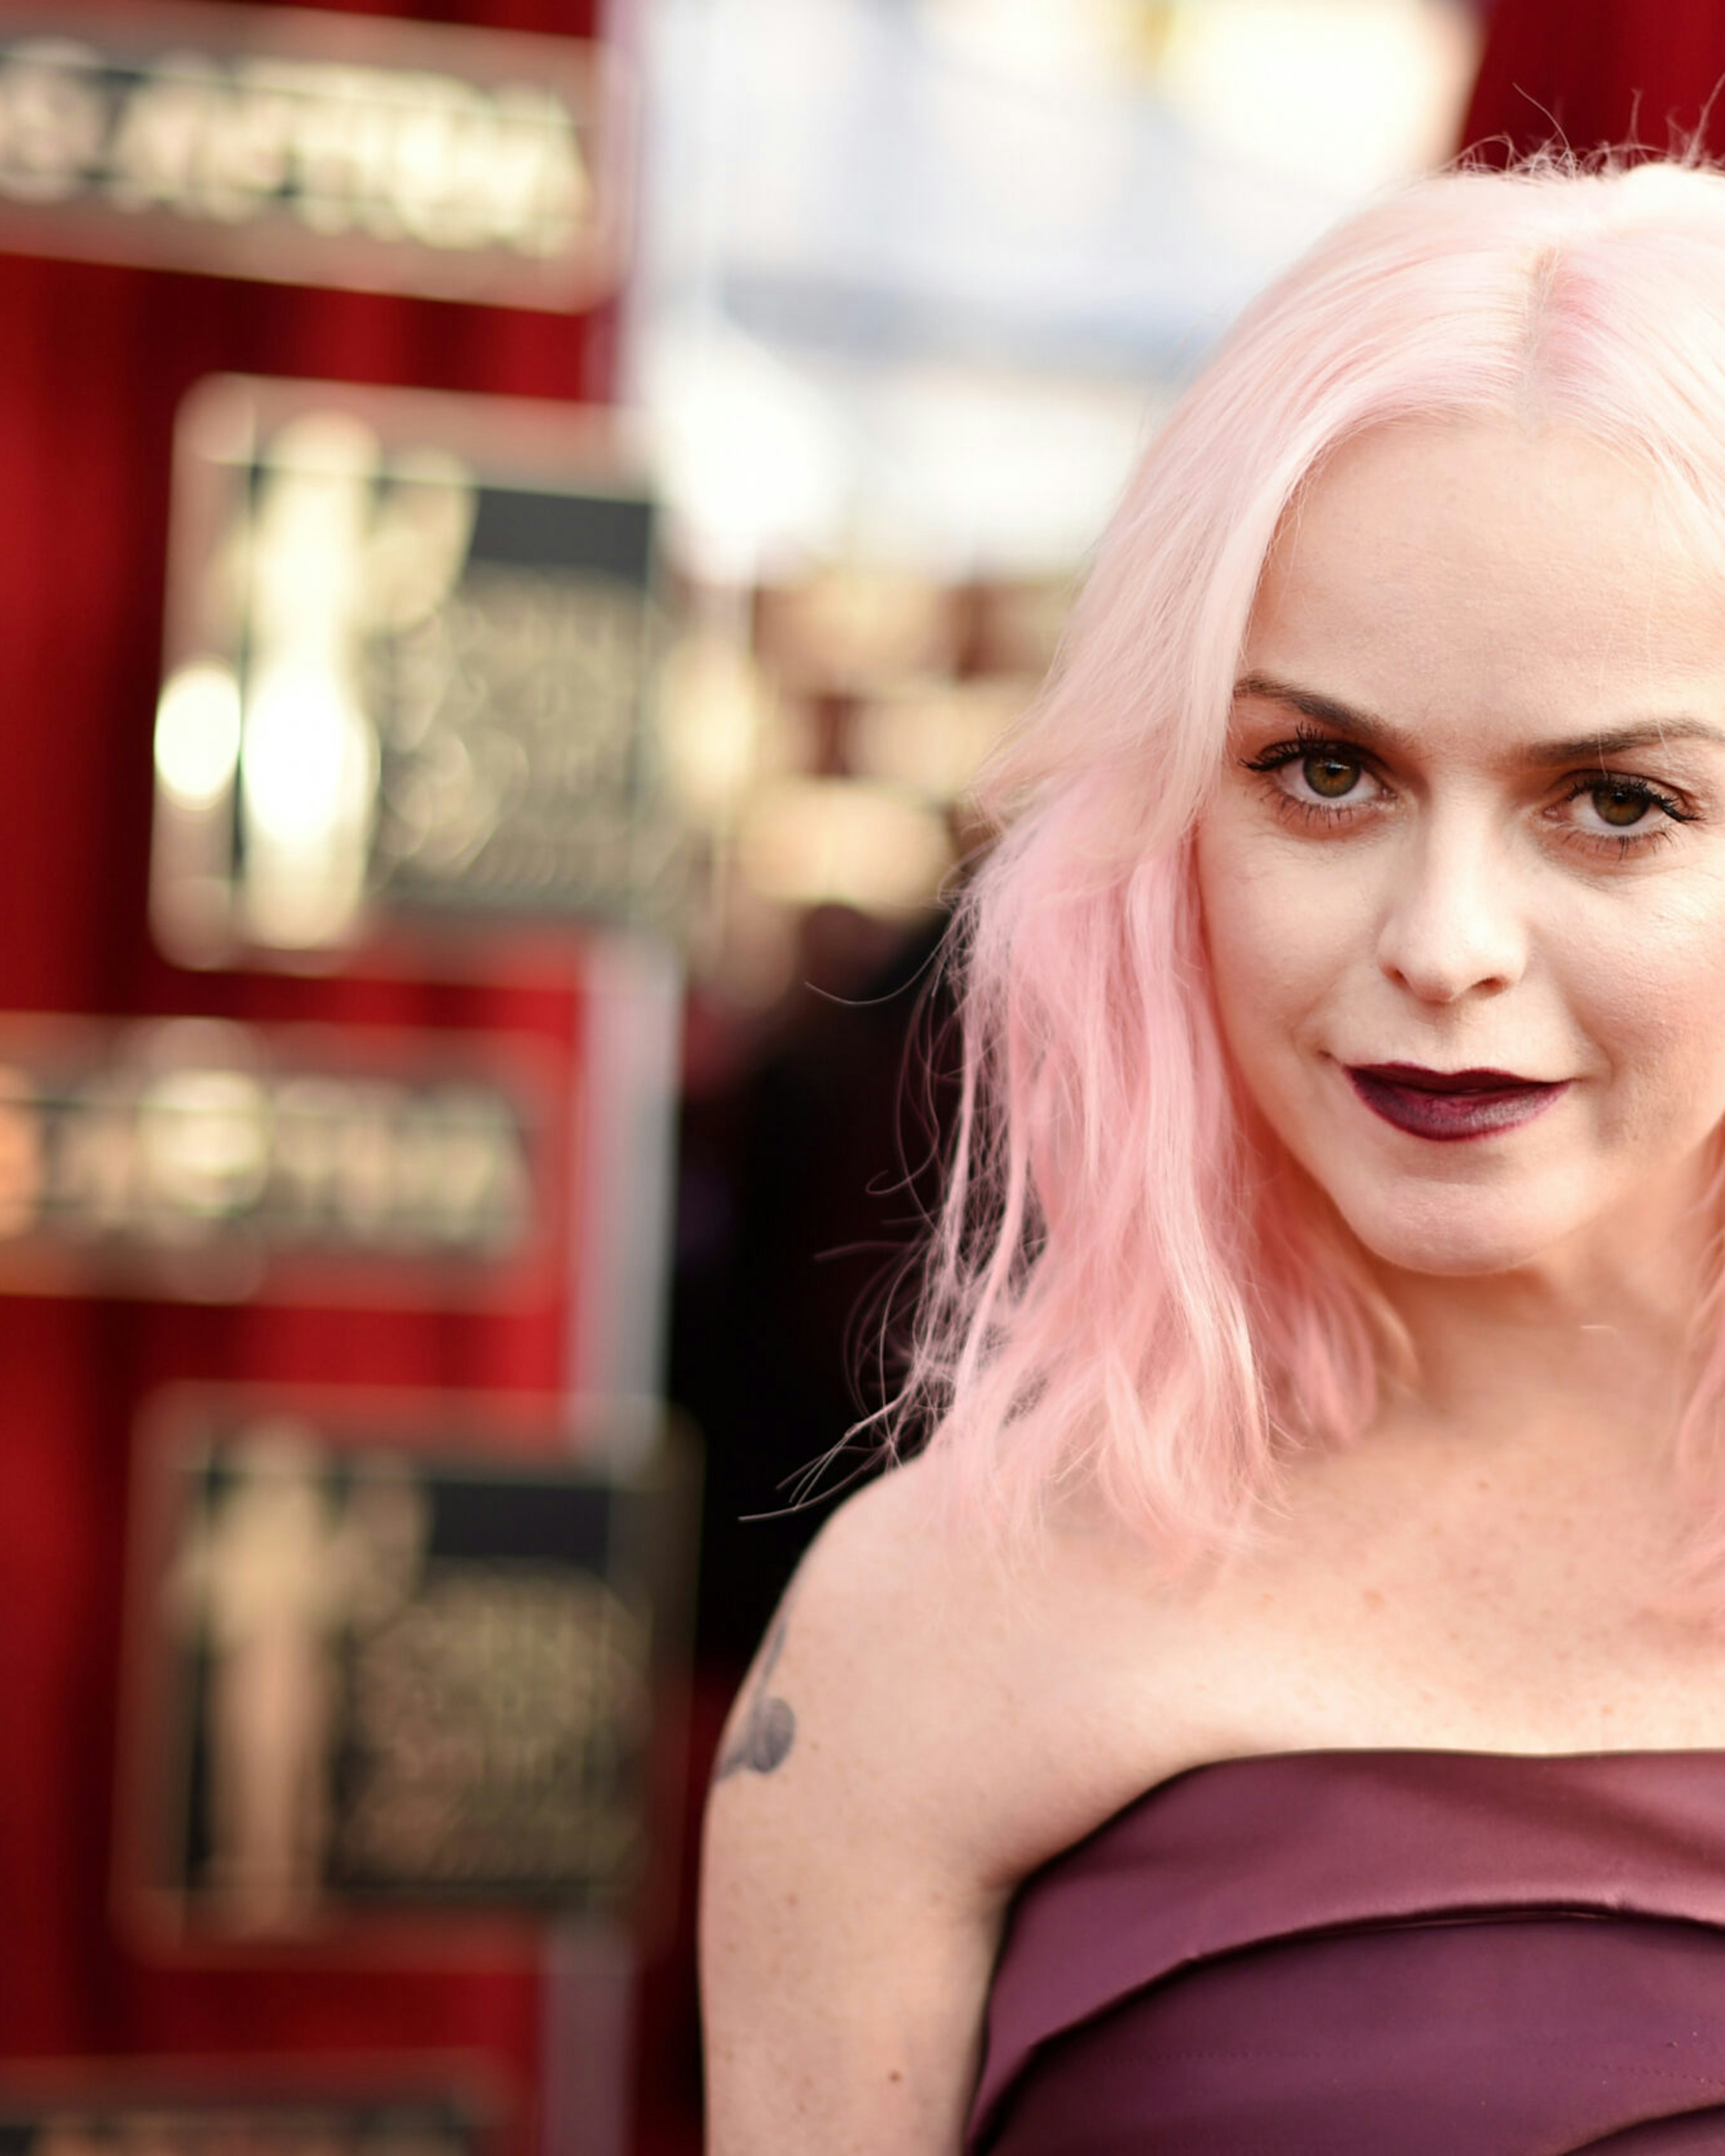 LOS ANGELES, CA - JANUARY 29: Actor Taryn Manning attends The 23rd Annual Screen Actors Guild Awards at The Shrine Auditorium on January 29, 2017 in Los Angeles, California. (Photo by John Shearer/Getty Images for People Magazine)